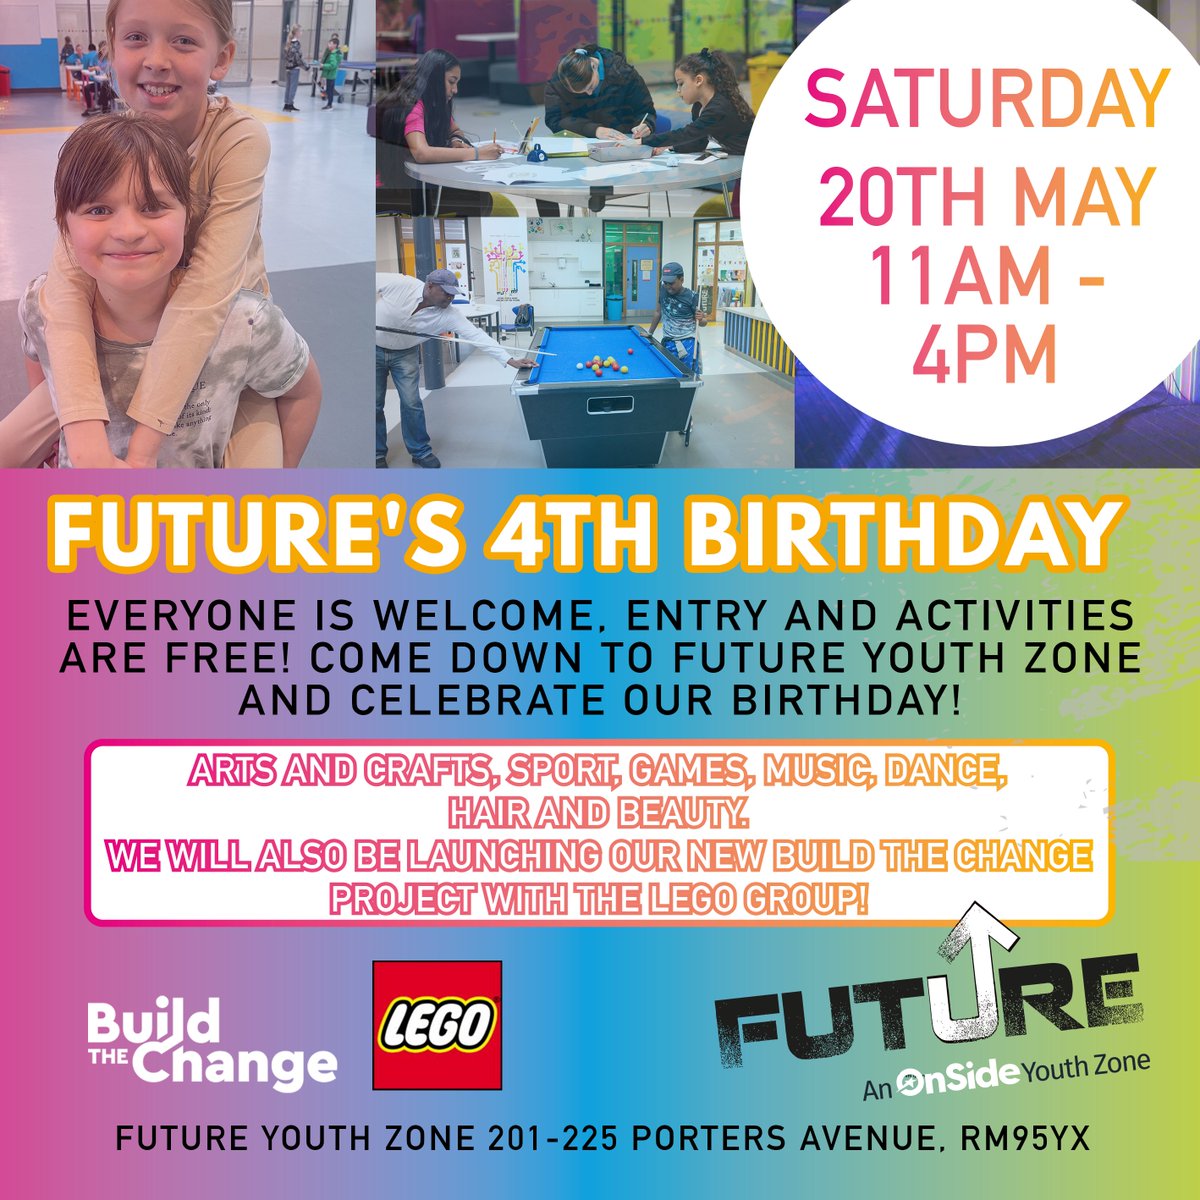 Future is turning 4 🥳 Come down and celebrate with us! 💙 📍Future Youth Zone, 20 May 11am-4pm, FREE ENTRY! 🌟 ARTS AND CRAFTS 🌟 SPORTS 🌟 PARTY GAMES 🌟 UR CARE with @elevateherUK 🌟 BUILD THE CHANGE PROJECT LAUNCH WITH the @LEGO_Group group